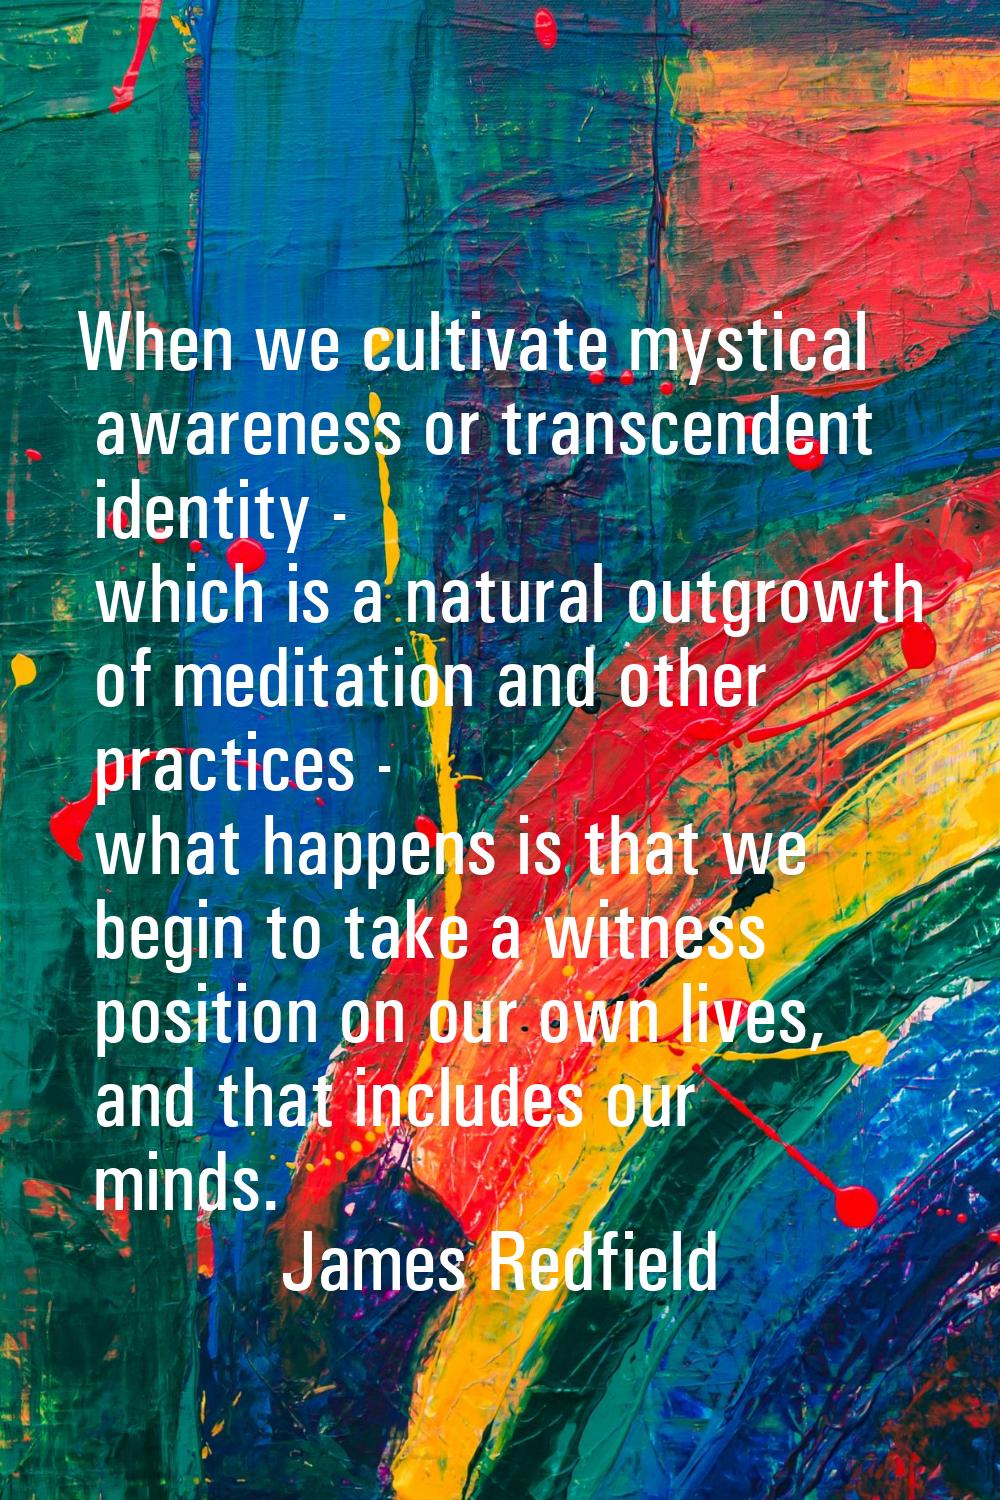 When we cultivate mystical awareness or transcendent identity - which is a natural outgrowth of med